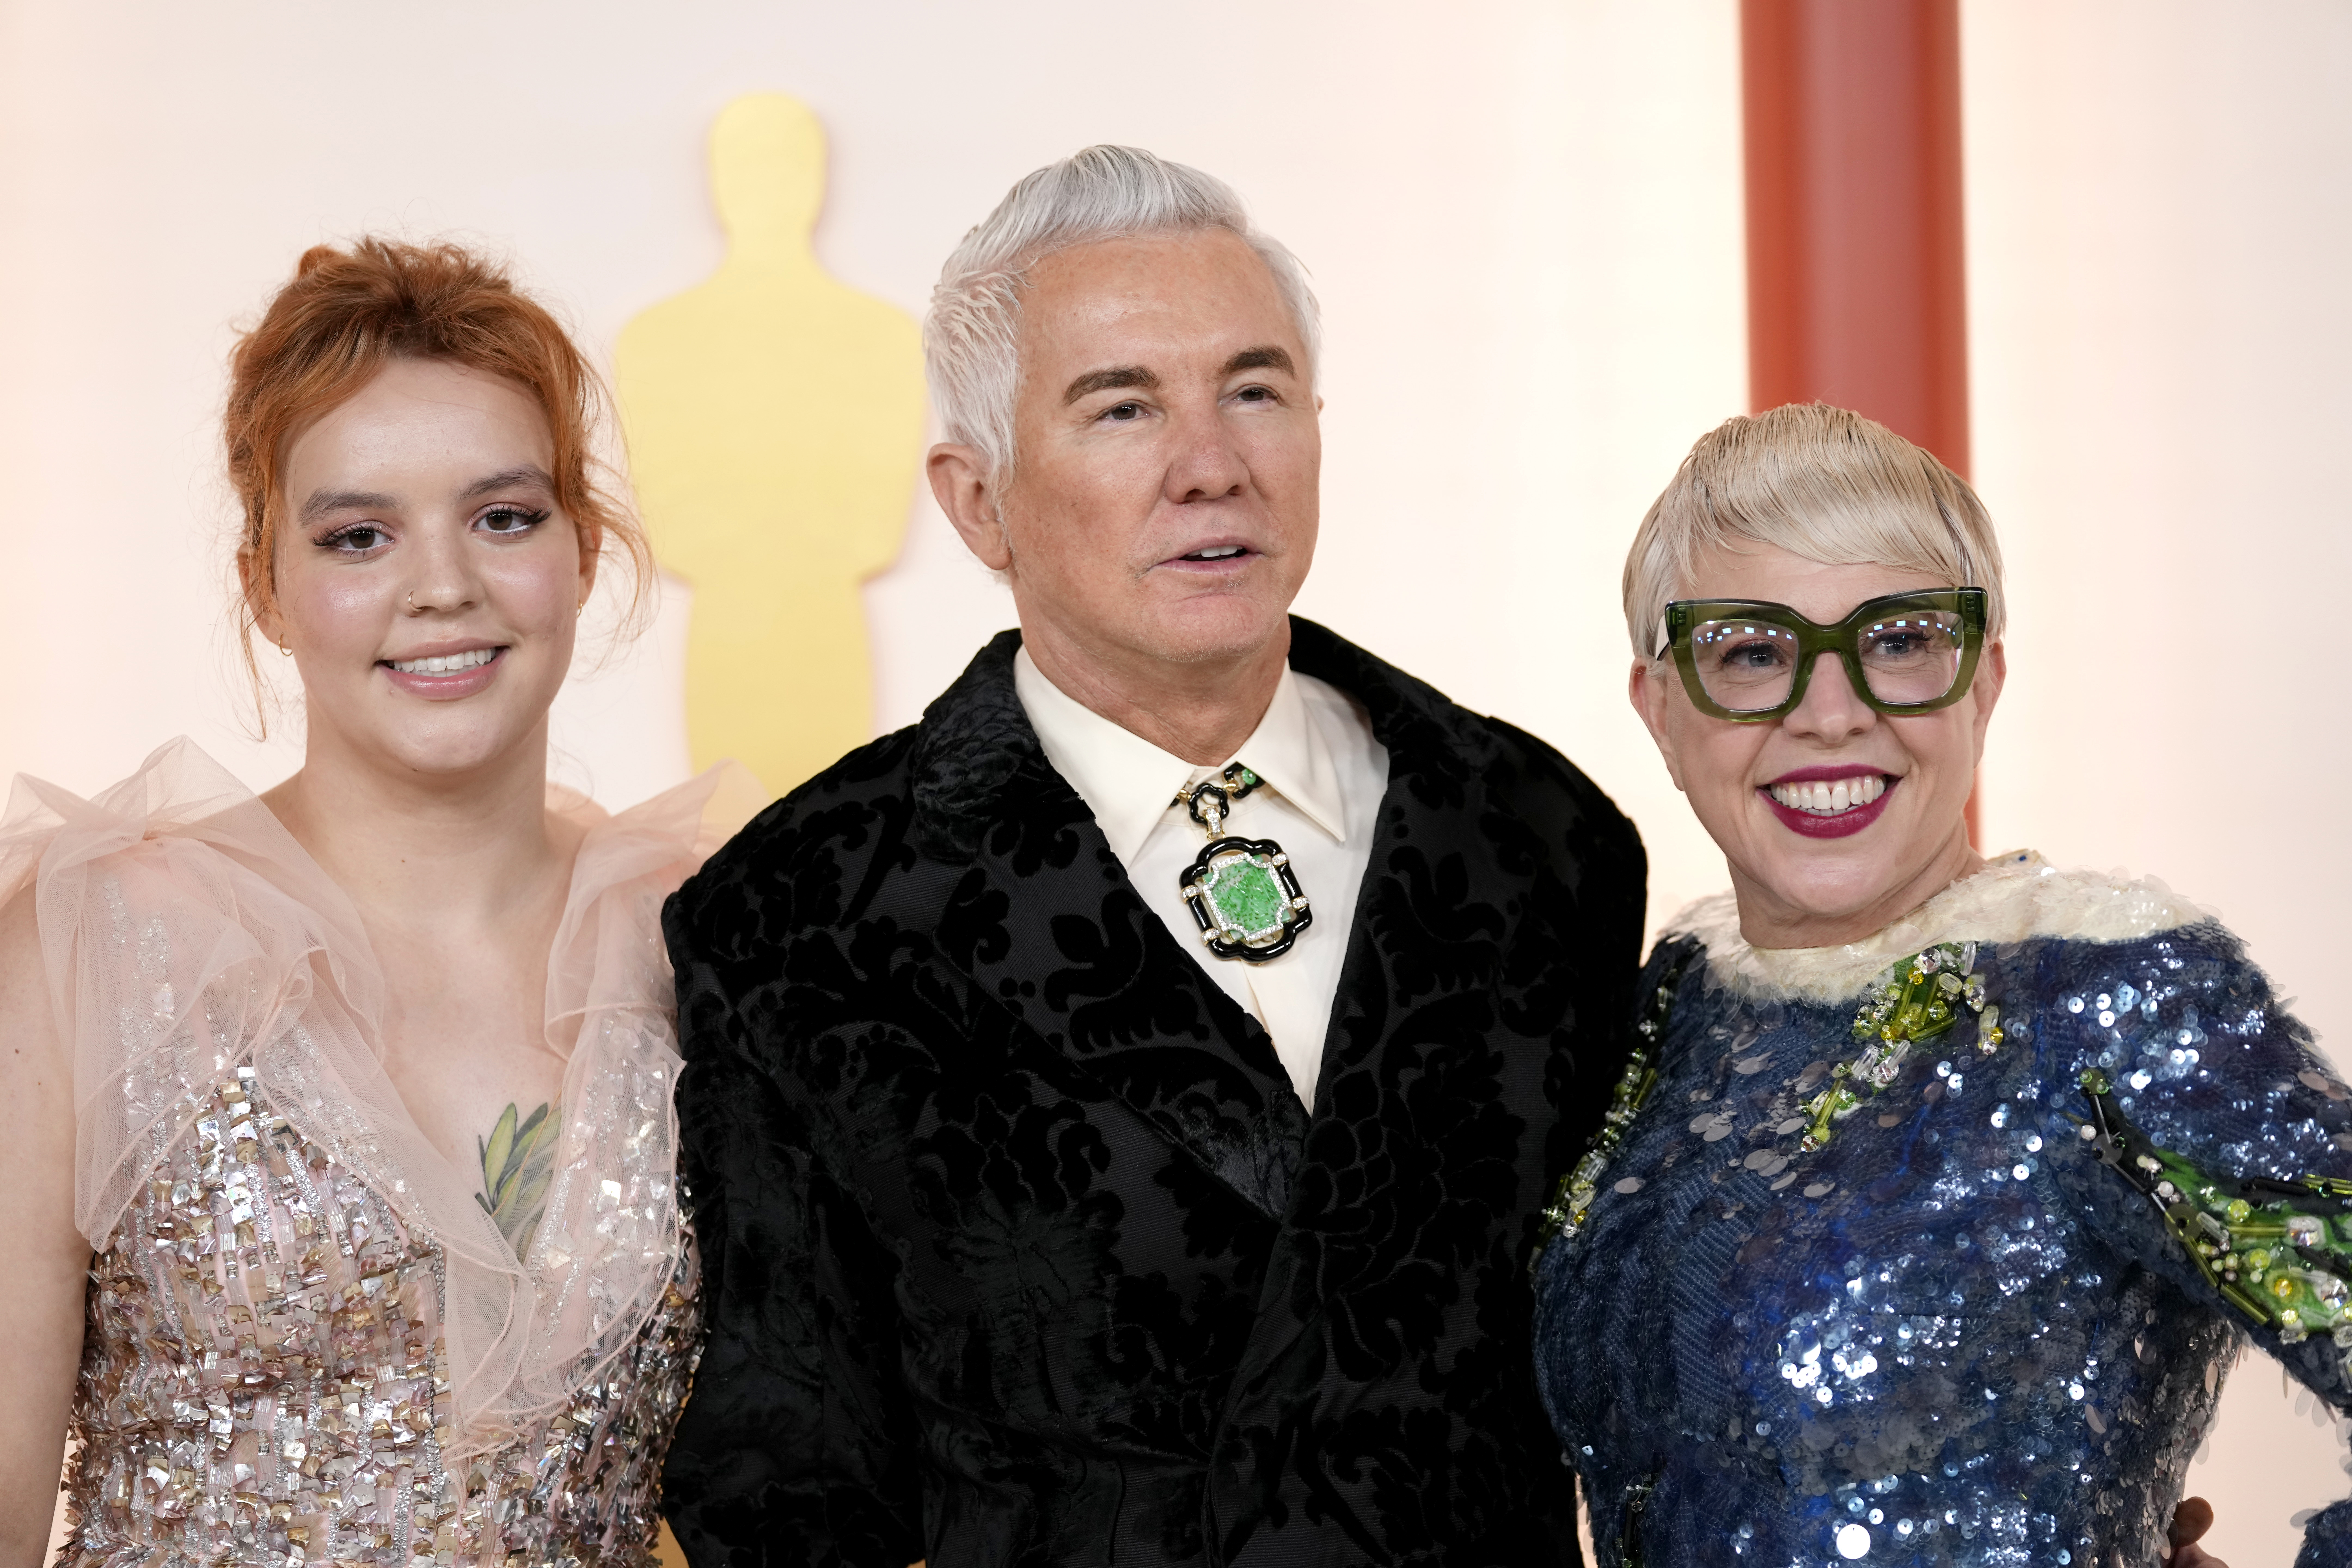 Lilly Luhrmann, Baz Luhrmann and Catherine Martin arrive at the Oscars on Sunday, March 12, 2023, at the Dolby Theatre in Los Angeles. (AP Photo/Ashley Landis)